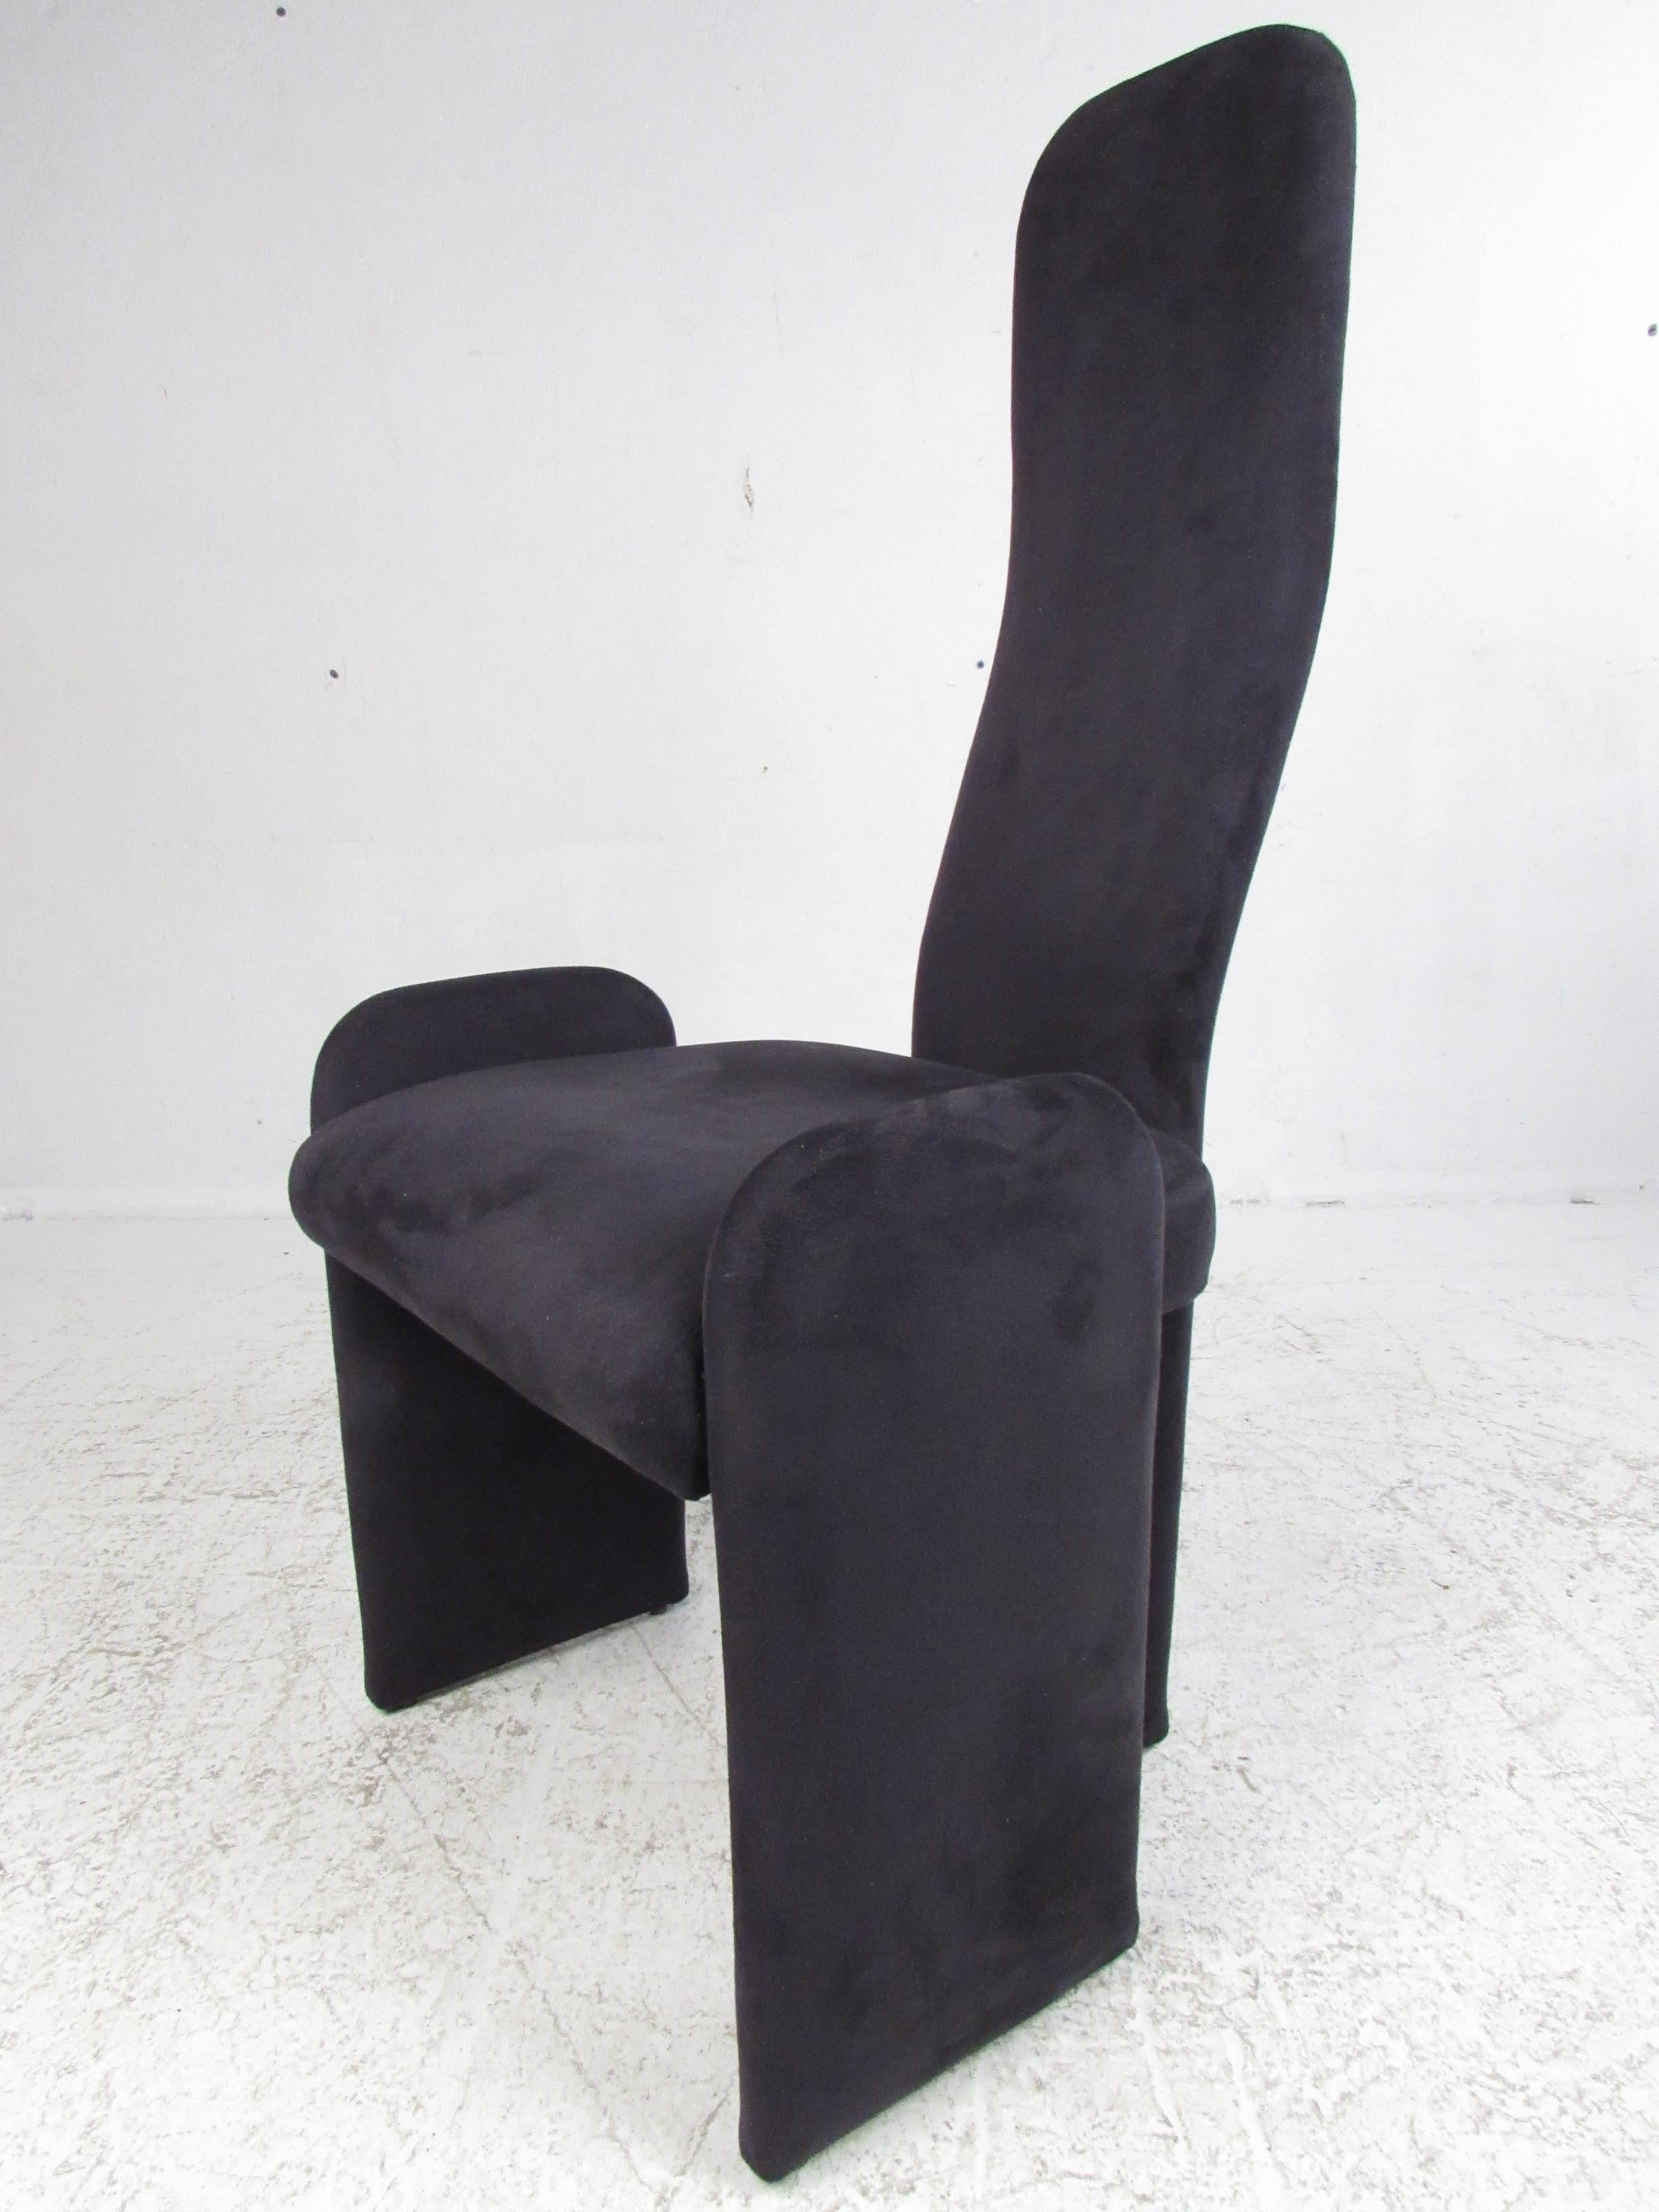 Sculptural dining chairs by Trendline Furniture in NY. Fully covered with tall backs.
Please confirm location NY or NJ.